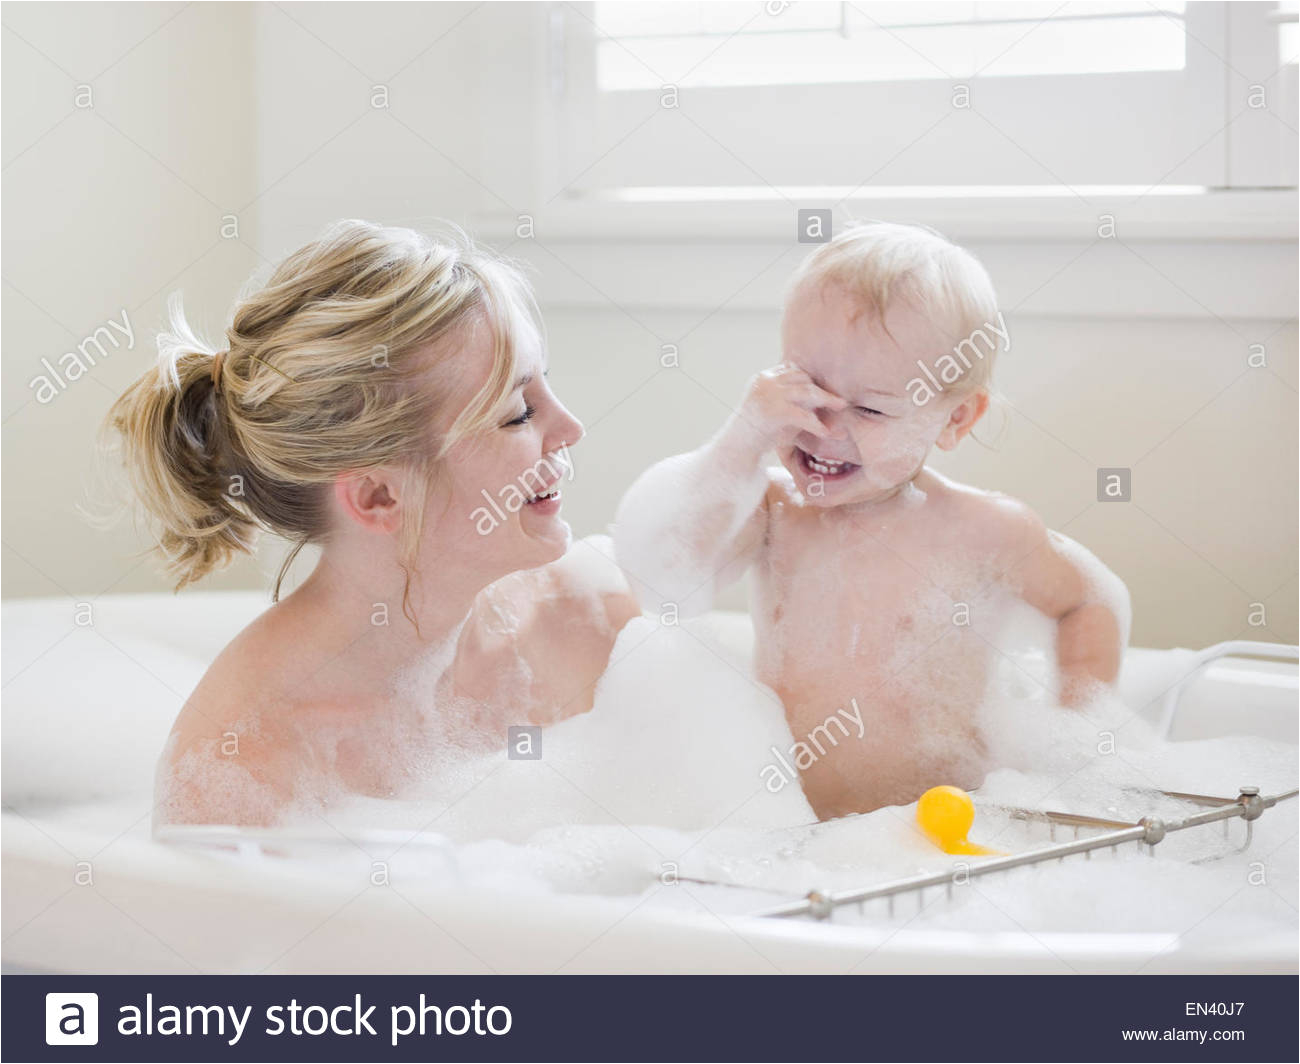 stock photo mother and baby taking a bubble bath